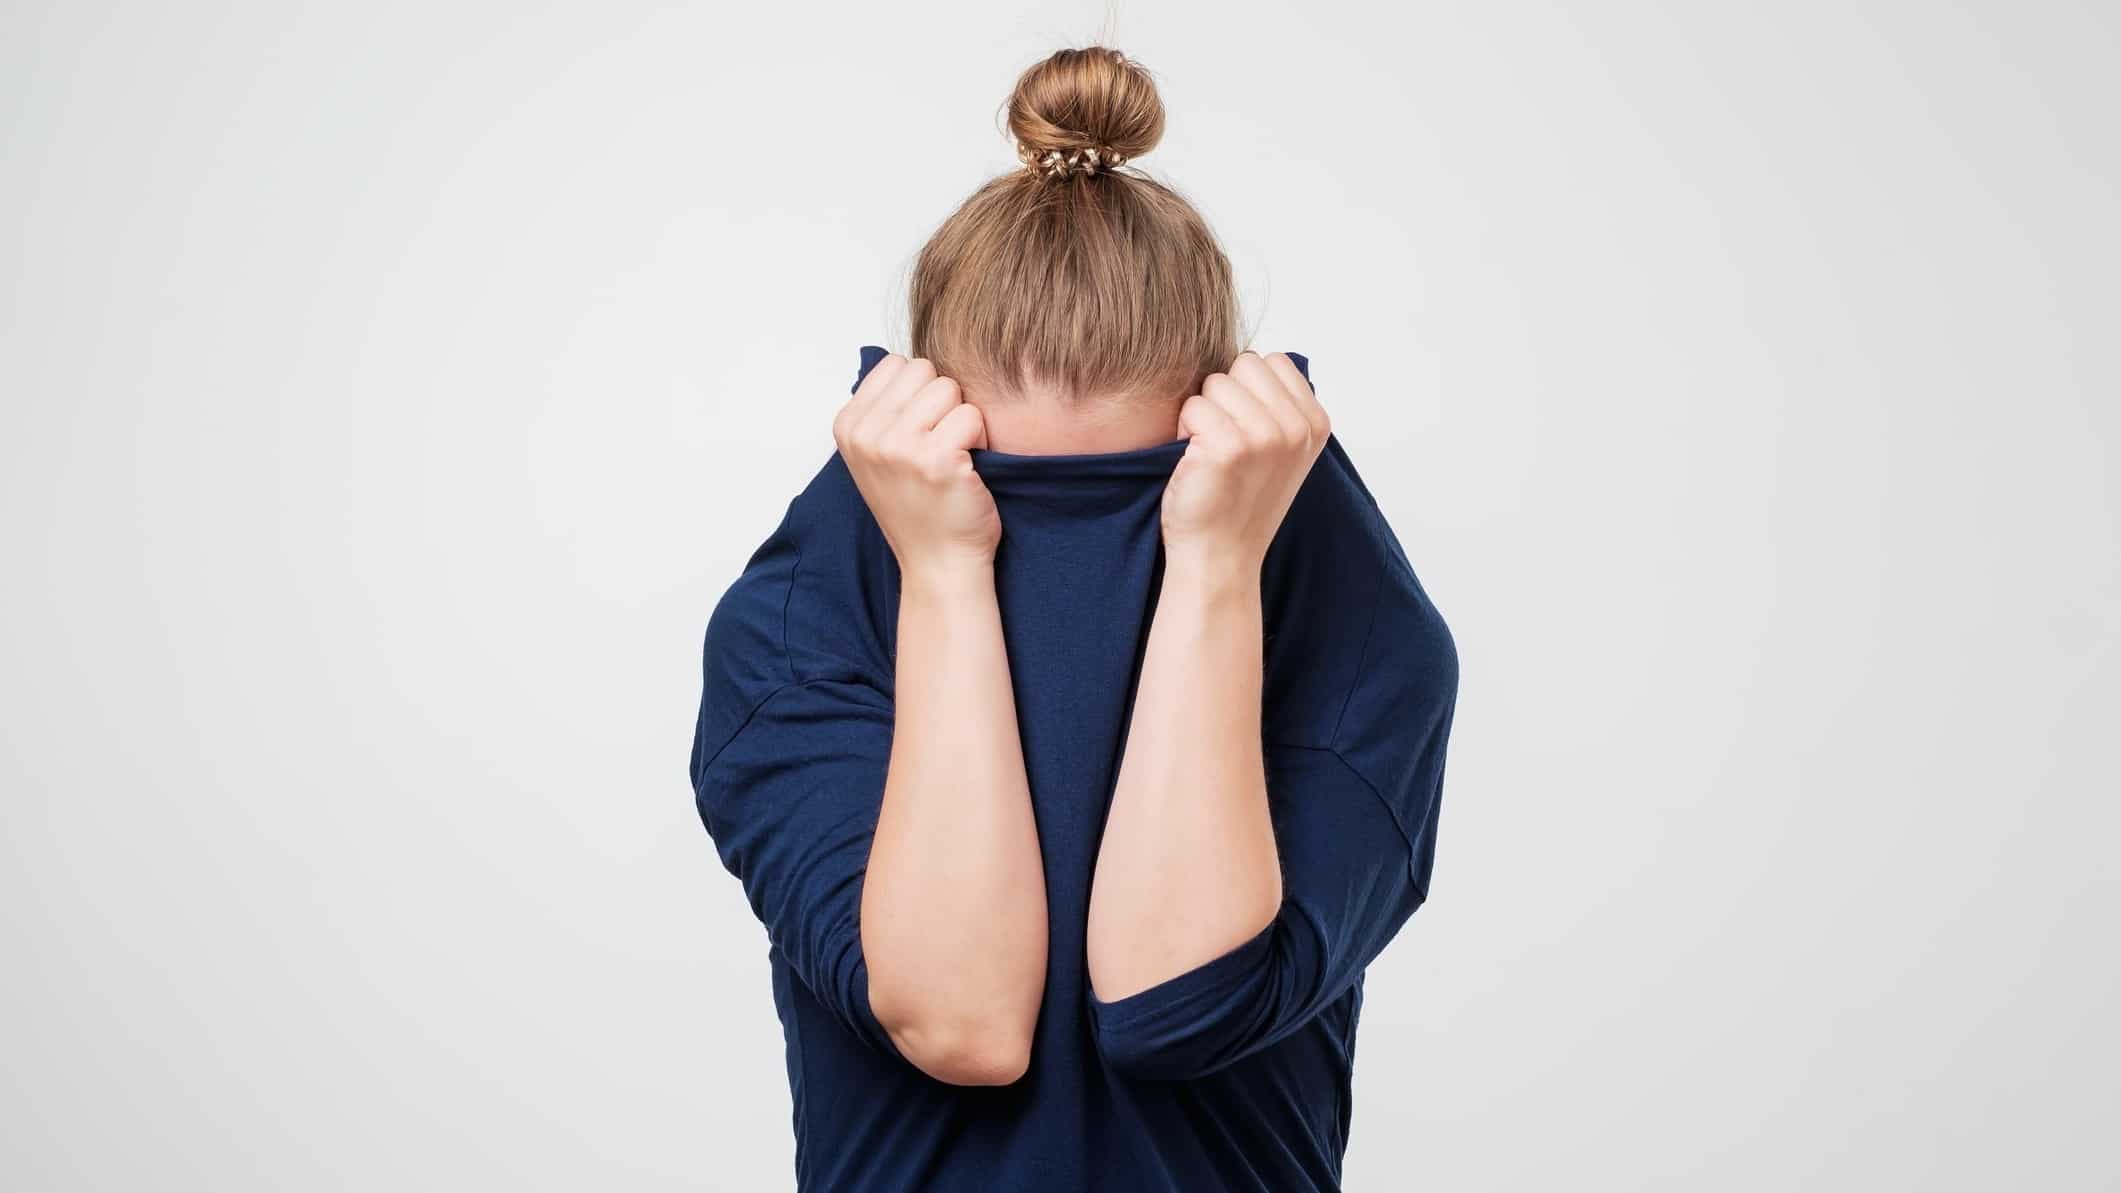 Bad asx shares broker downgrade represented by woman hiding face under her jumper.